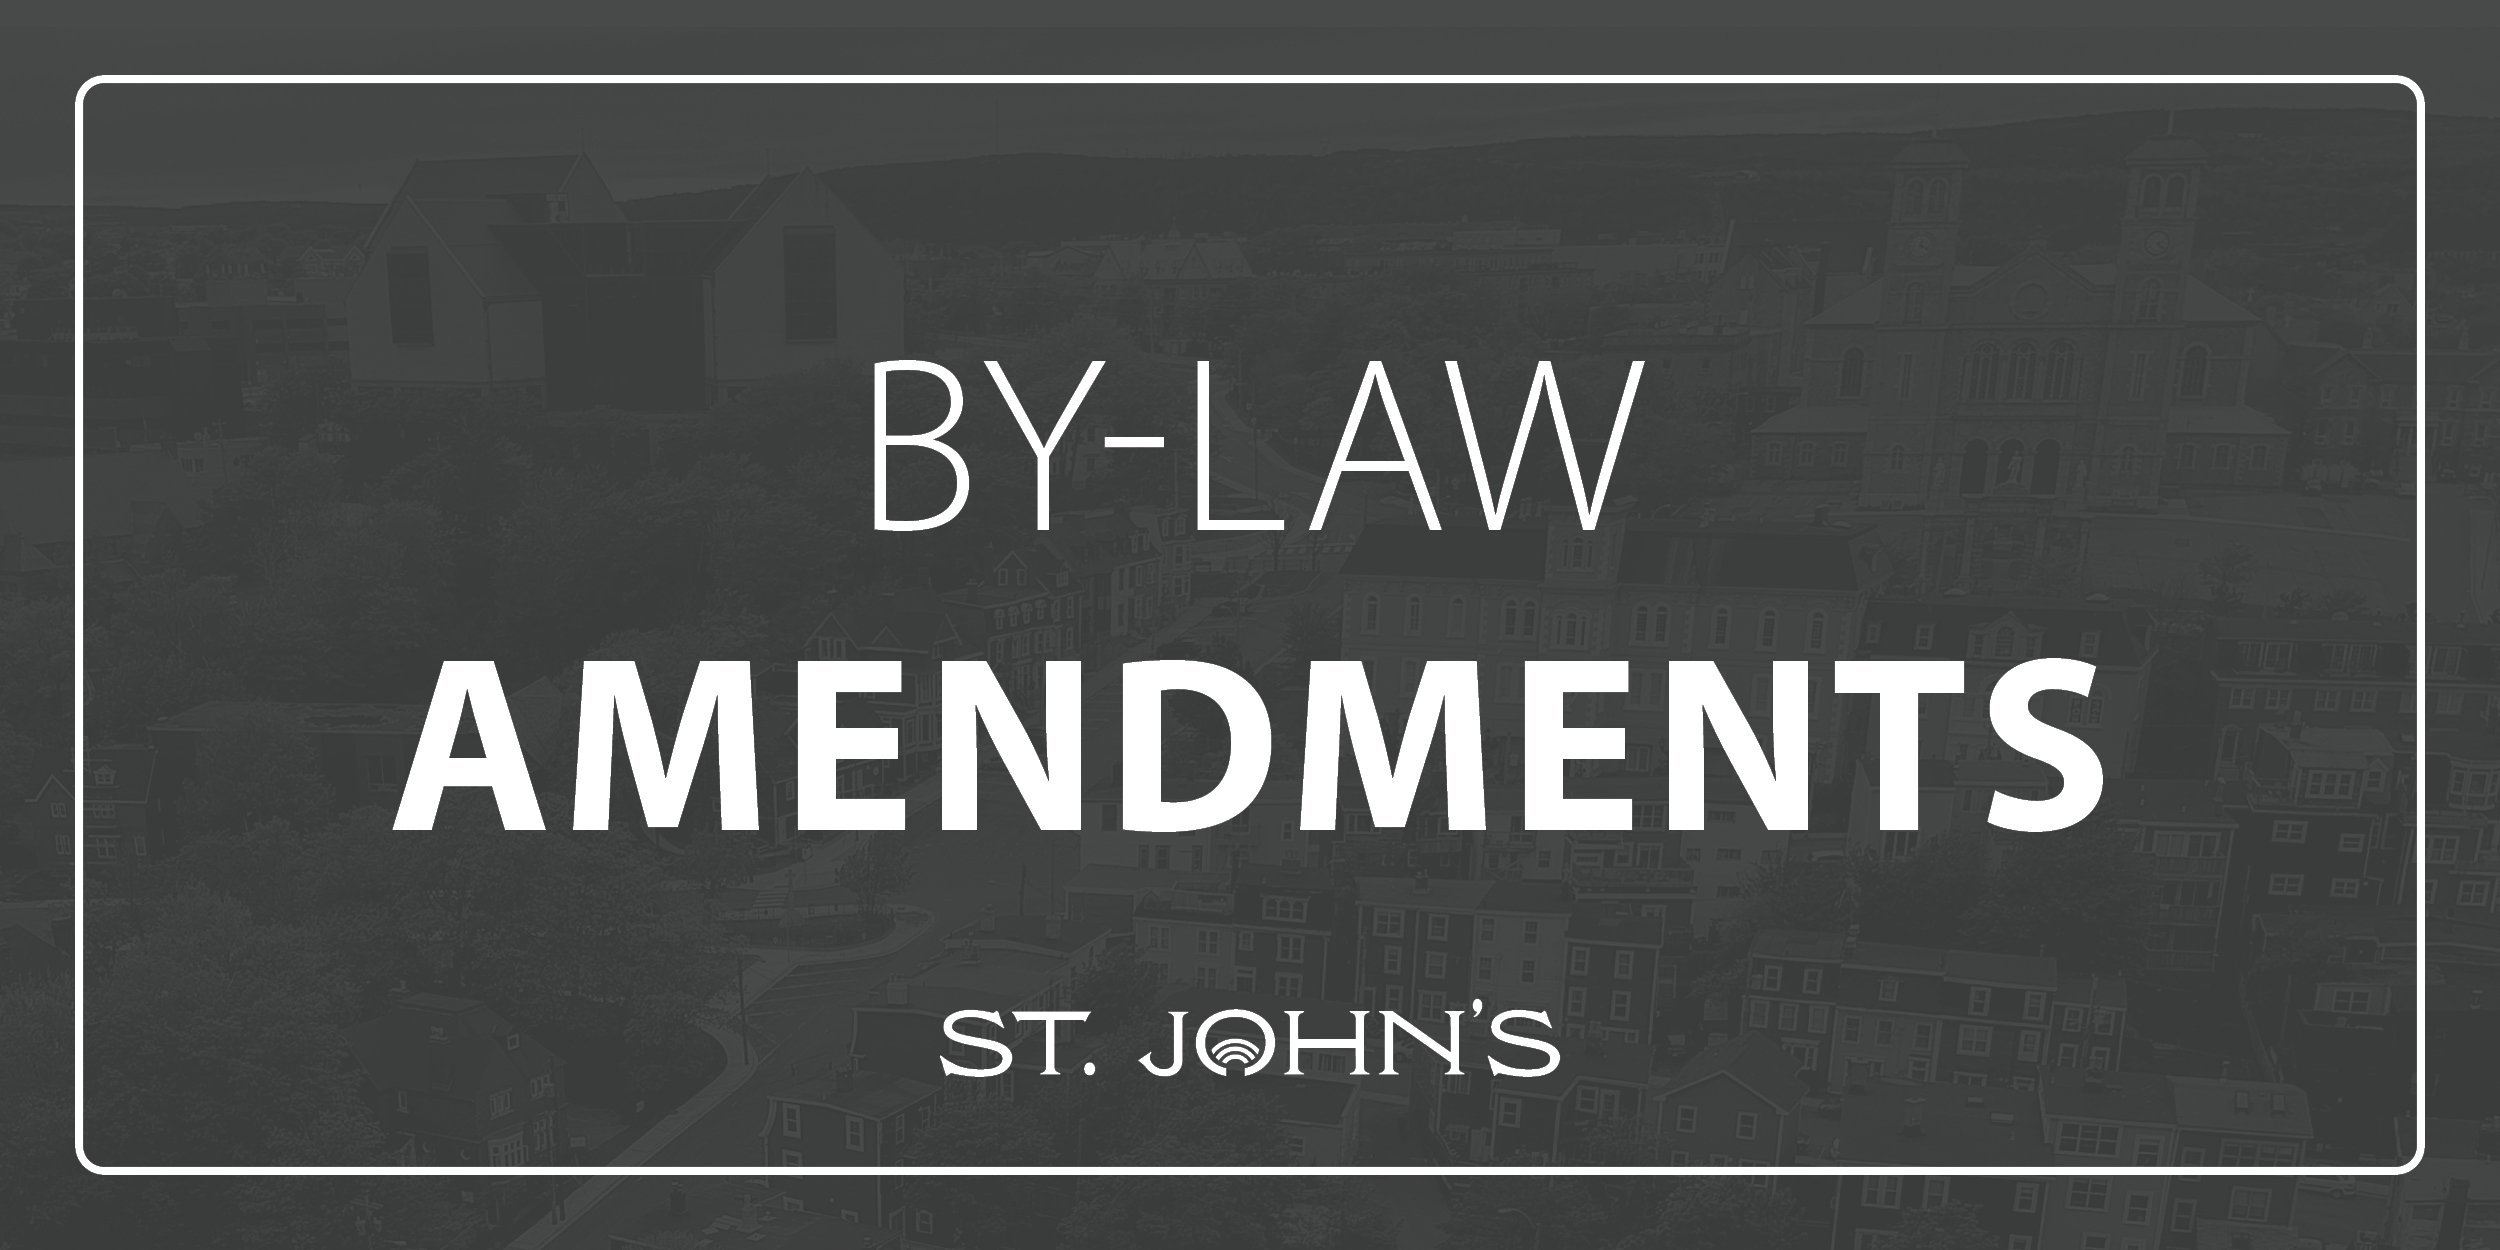 Grey background with text that says By Law Amendments